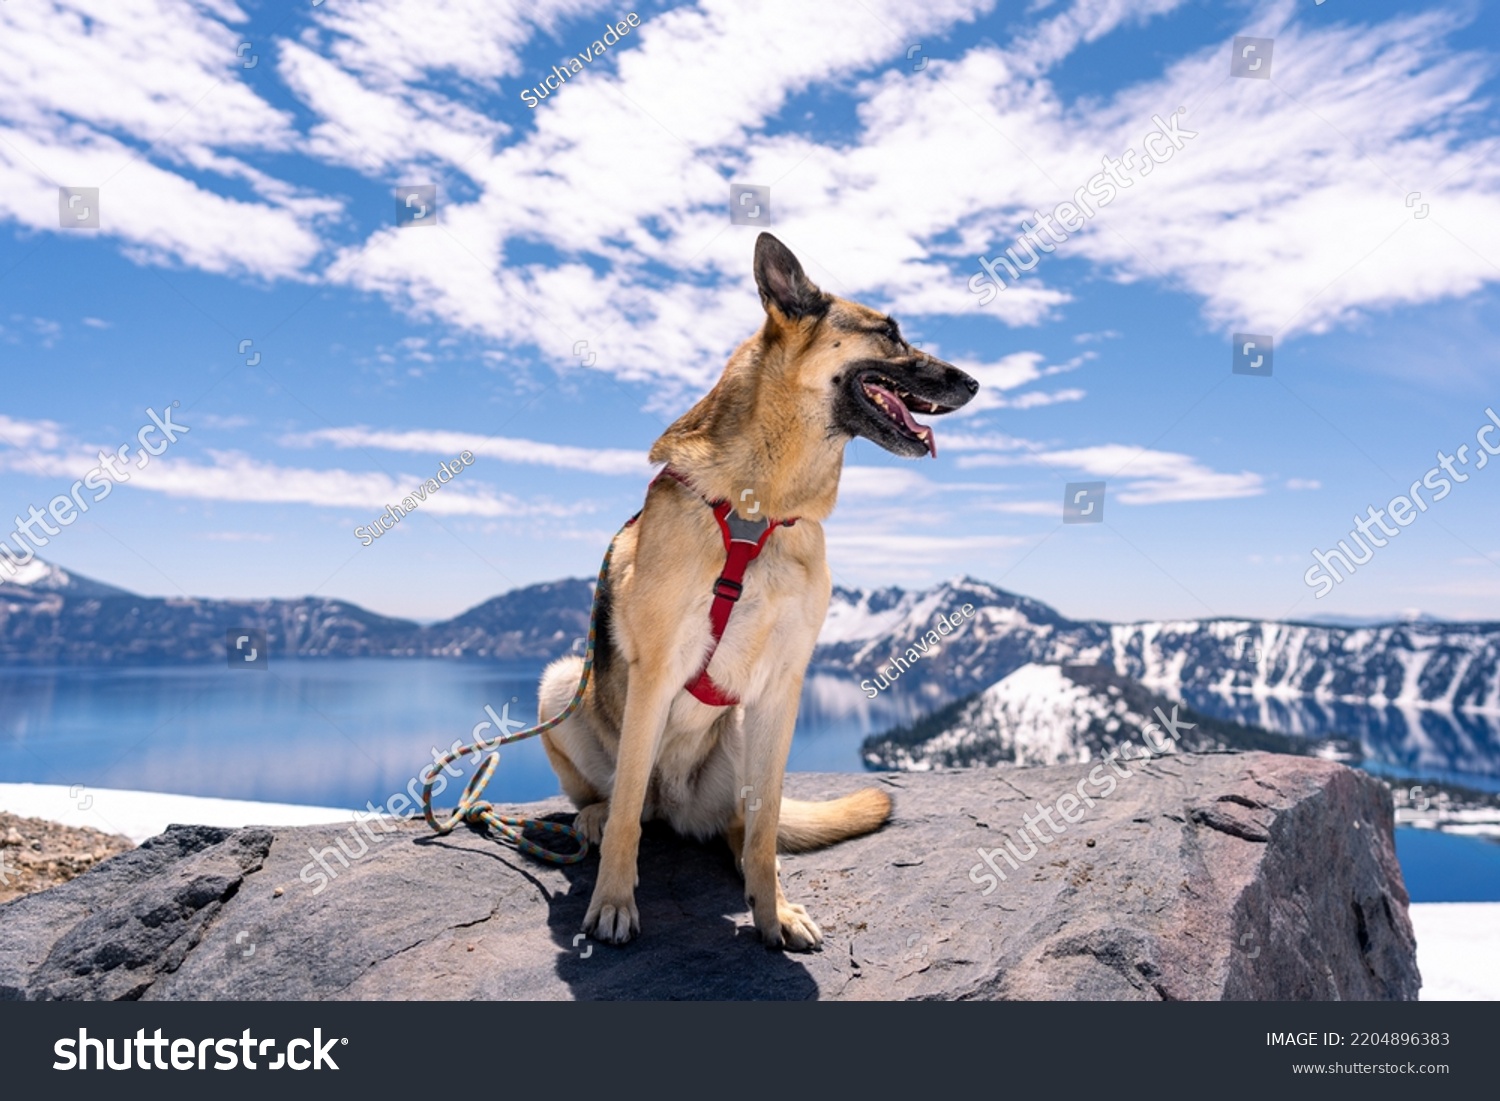 German Shepherd sitting on big rock smiling and looking away from owner with Crater Lake and mountains covered with snow in the background #2204896383